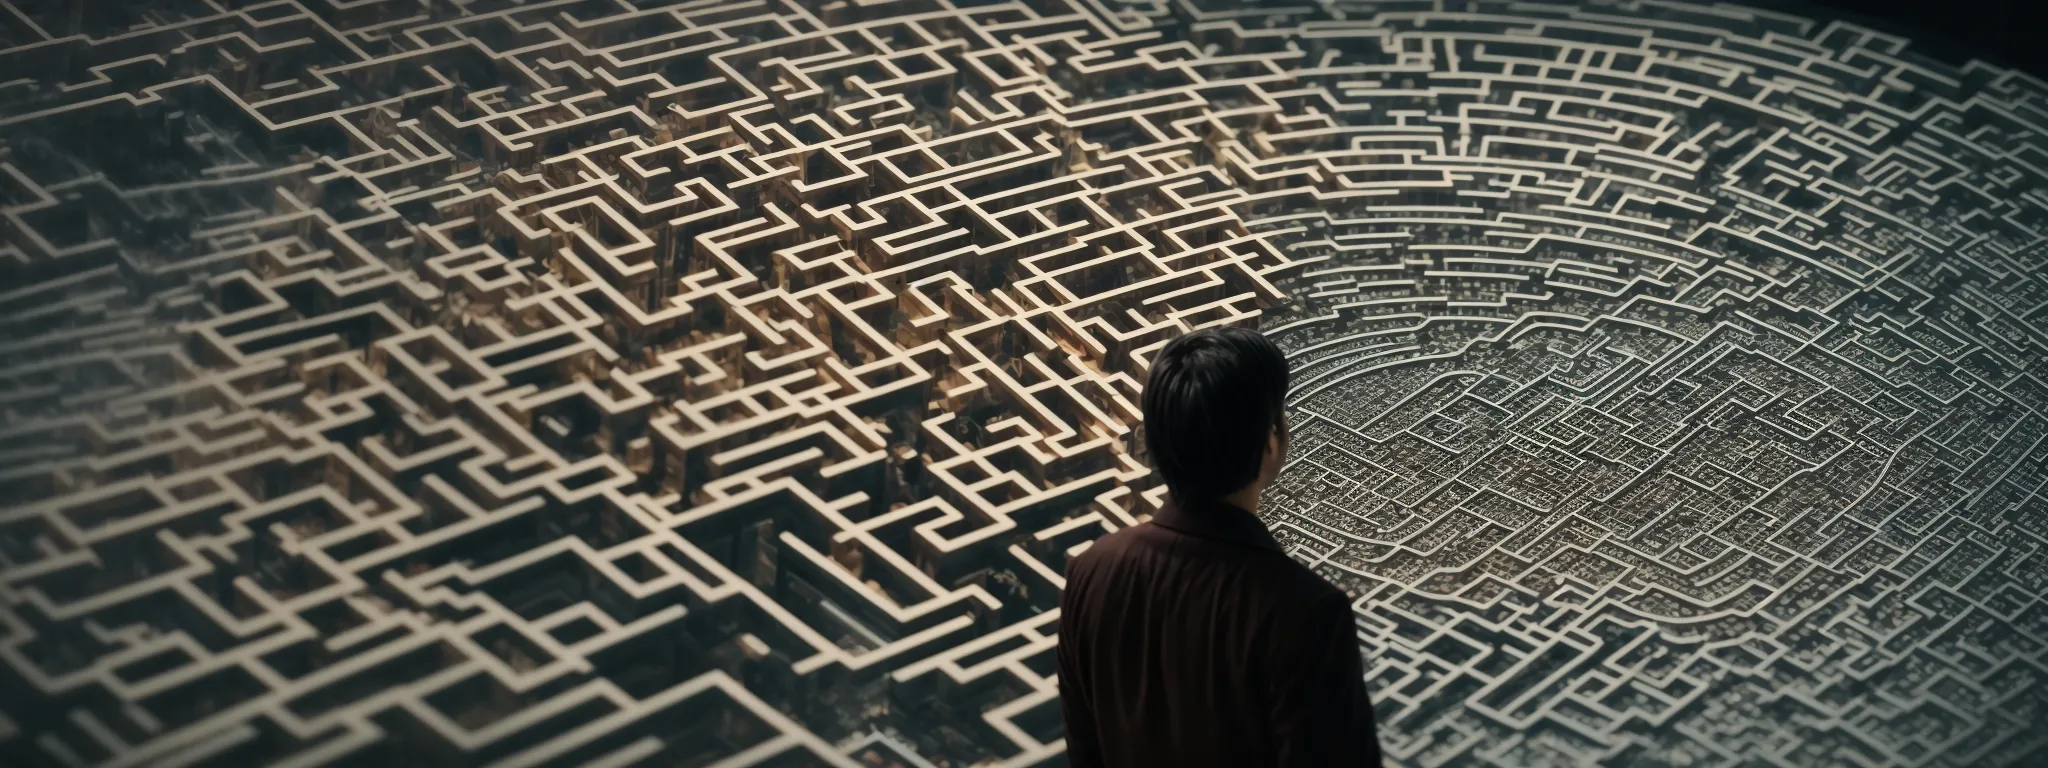 a person contemplates a large, intricate maze-shaped computer interface symbolizing analytical seo processes.